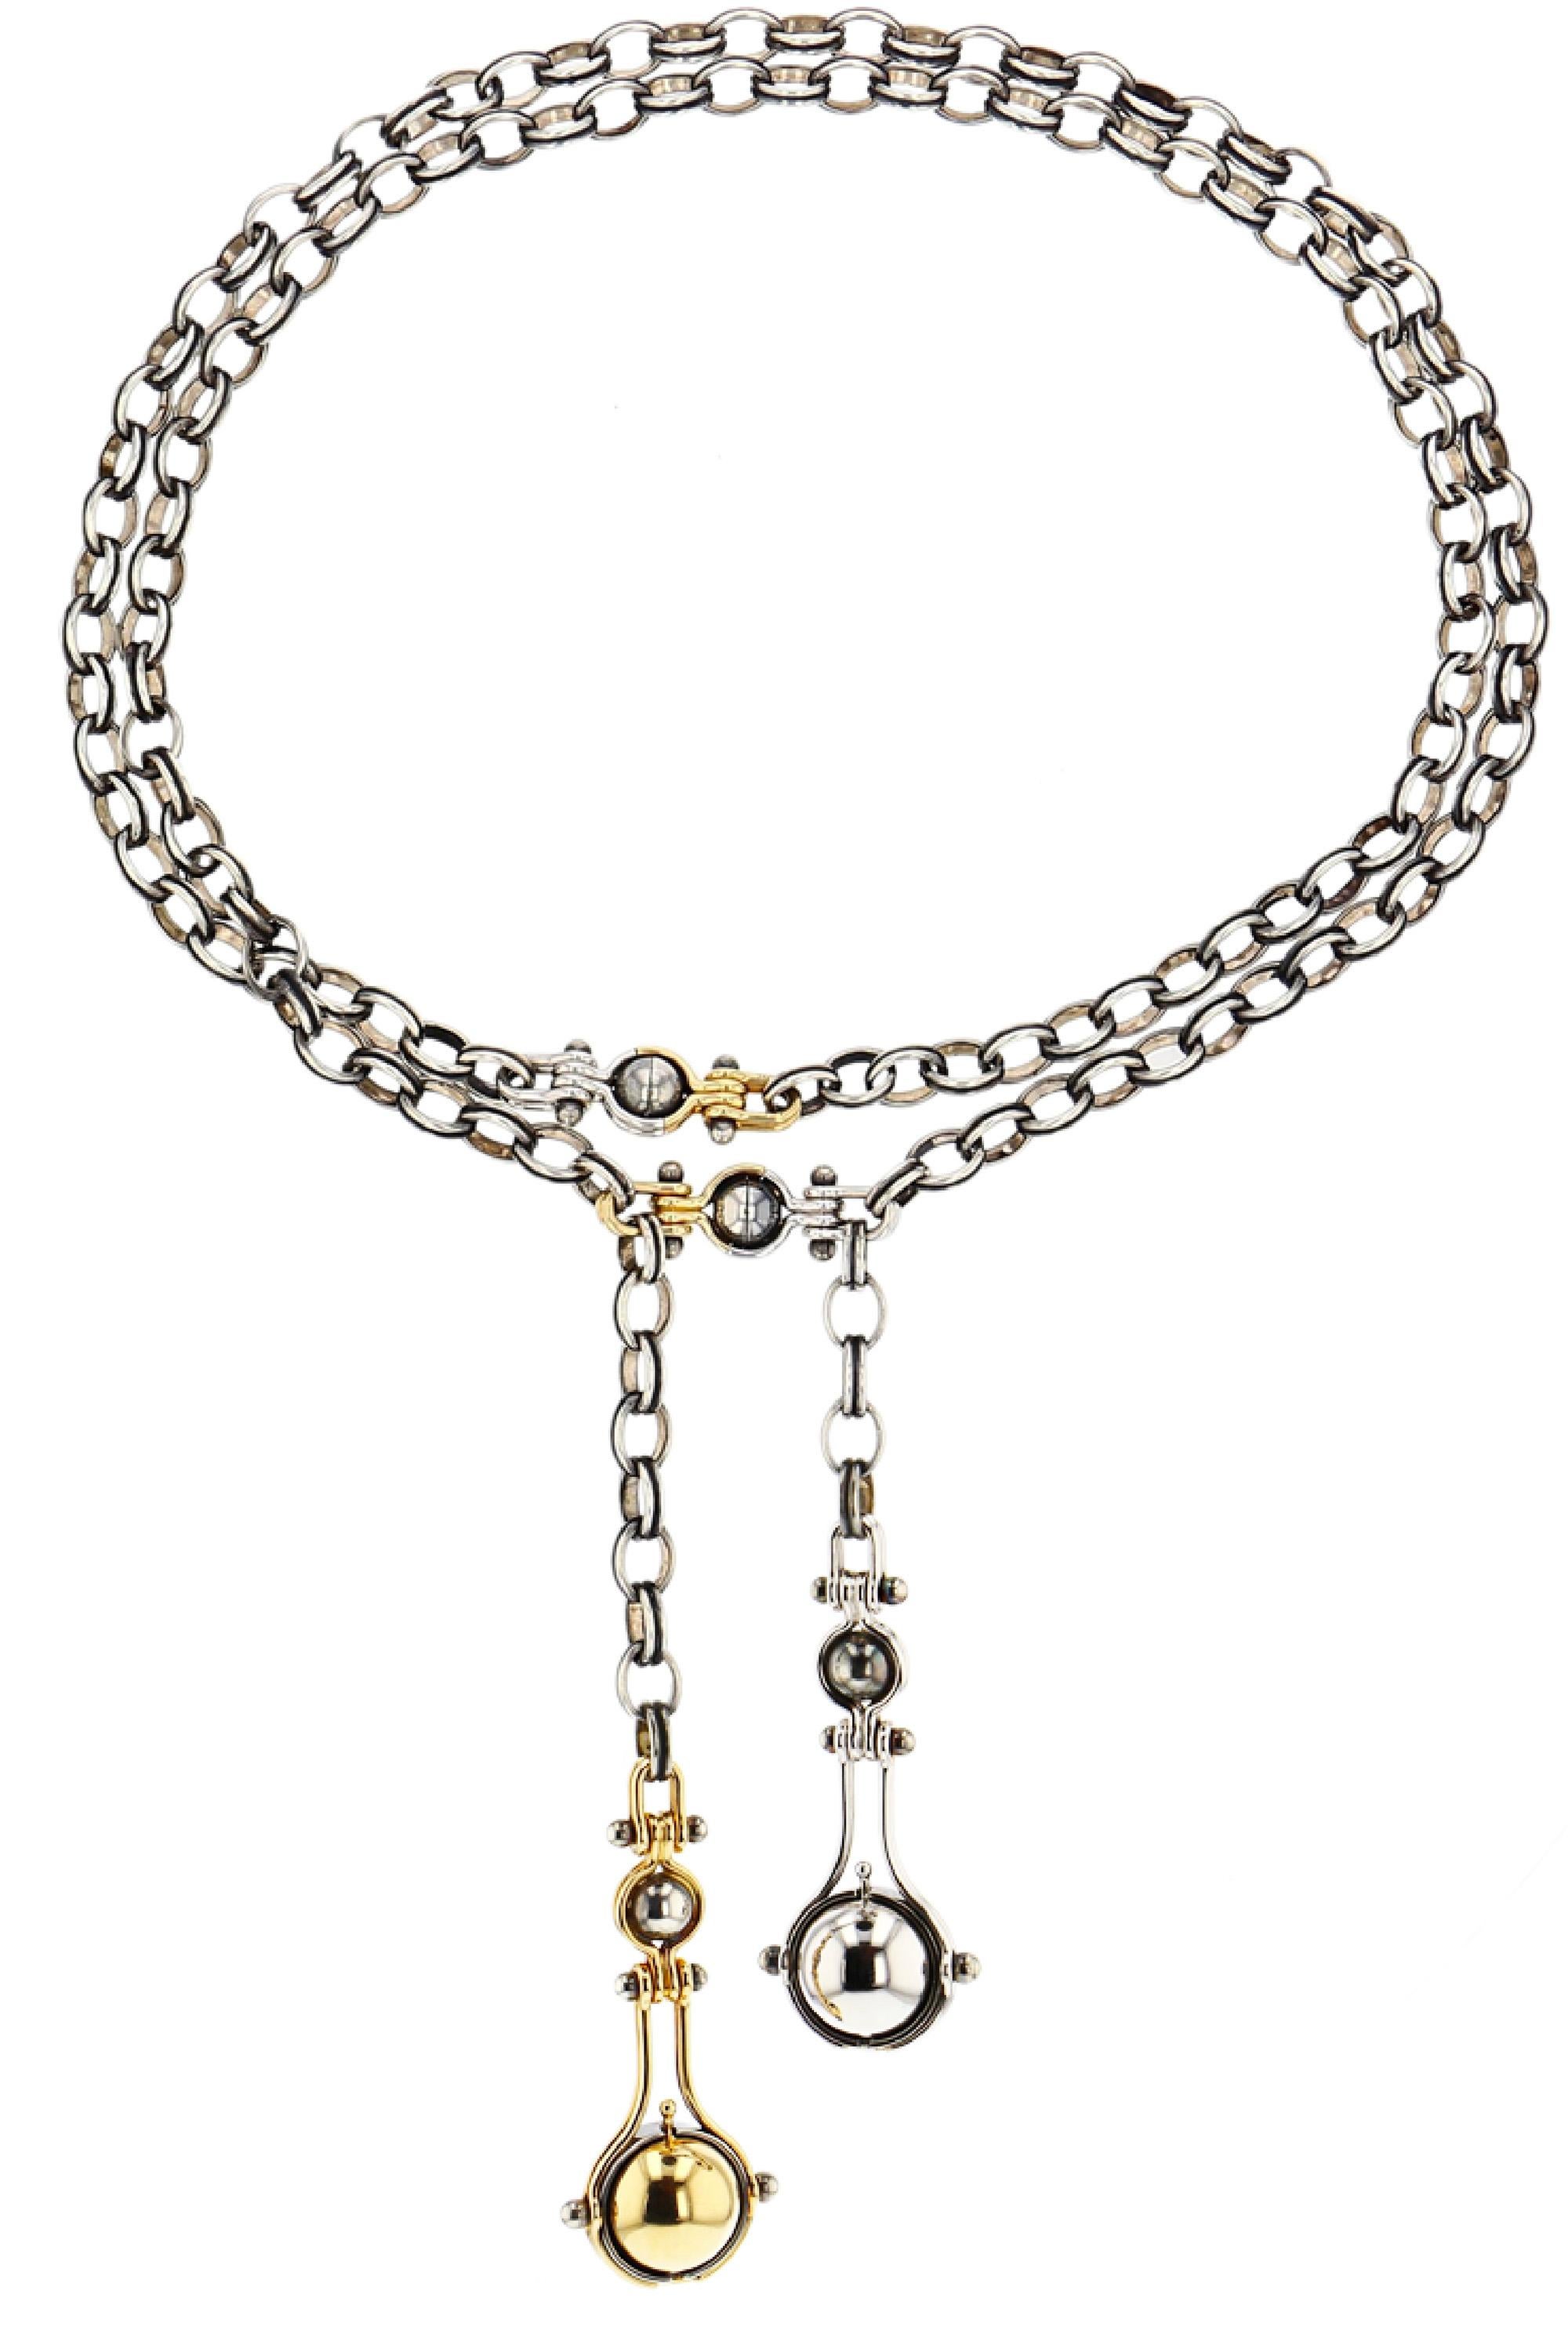 Necklace in gold and distressed silver. Rotating spheres: one reveals an Akoya pearl, set with a diamond and encircled by a white gold ring; the other reveals a Tahitian pearl, set with a diamond and encircled by a black gold ring.

Distressed